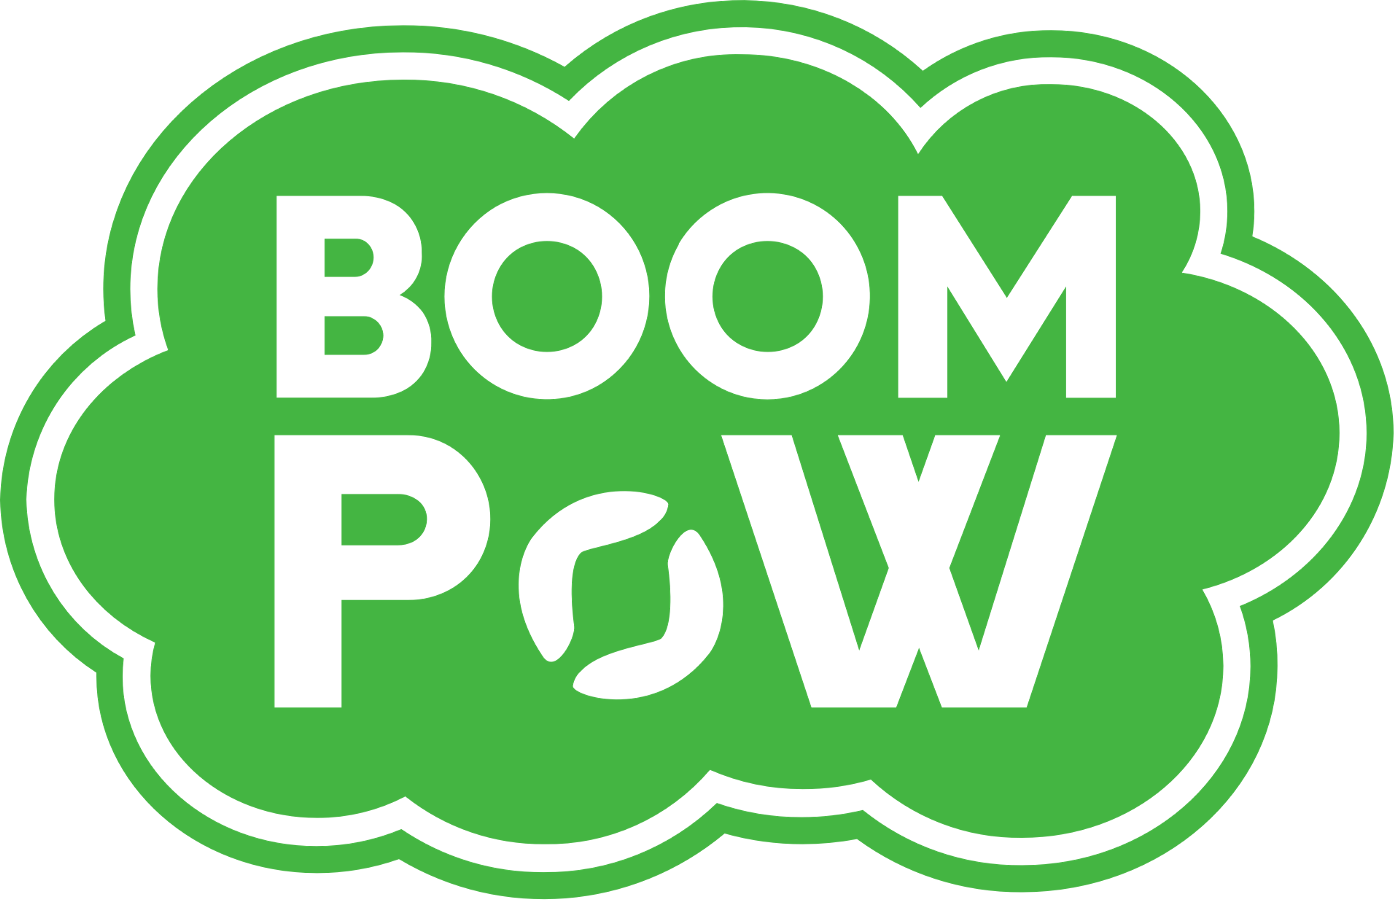 Announcing BoomPoW v2 - The Next Generation of BANANO's Distributed Proof of Work System